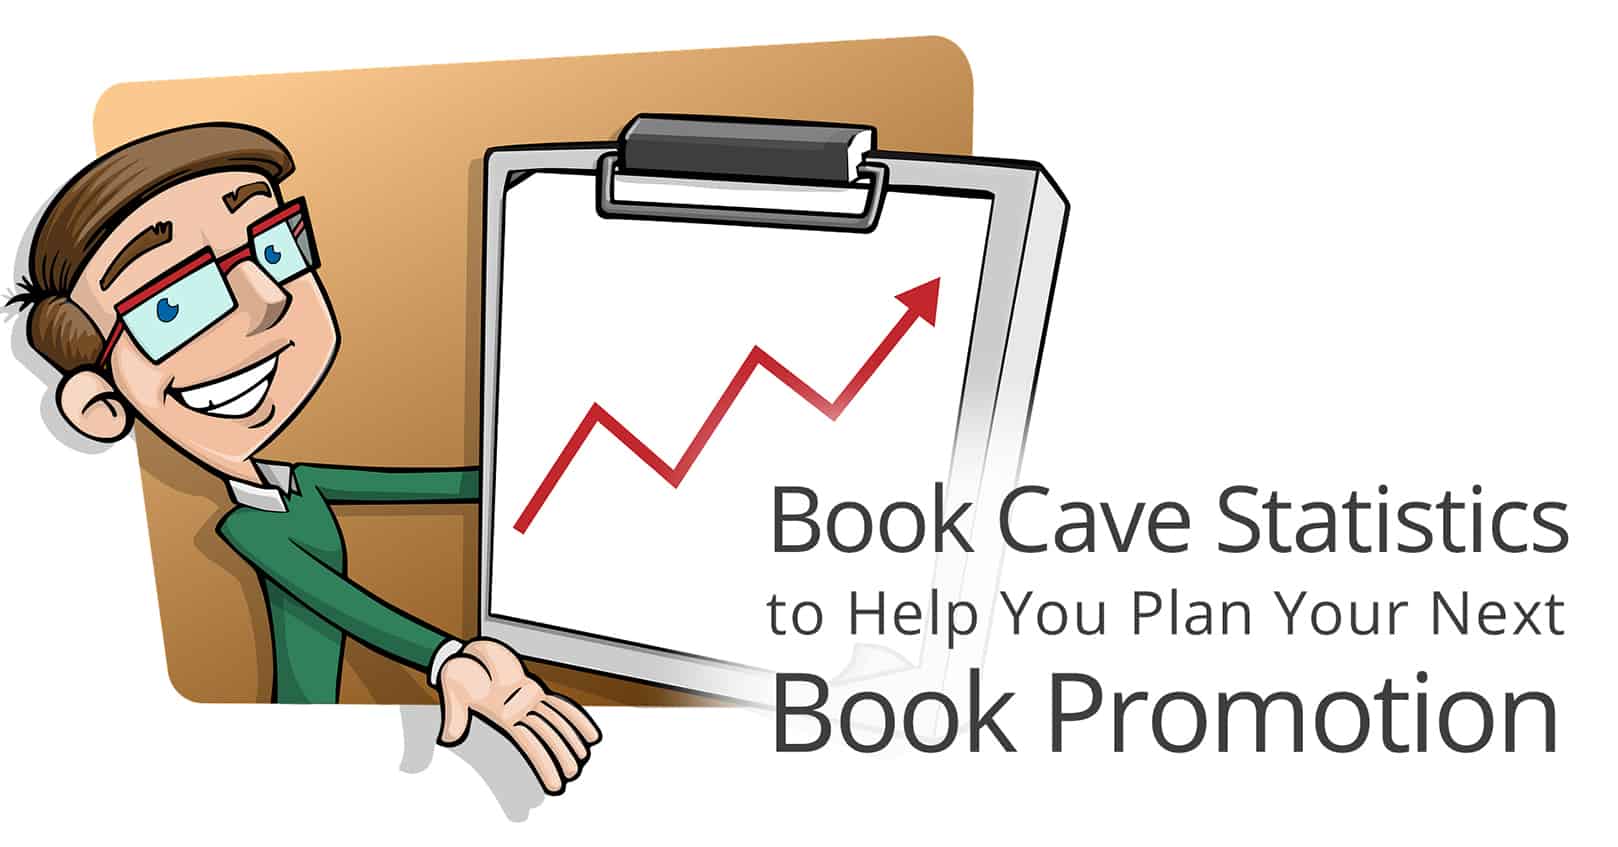 book cave statistics to help plan book promotion